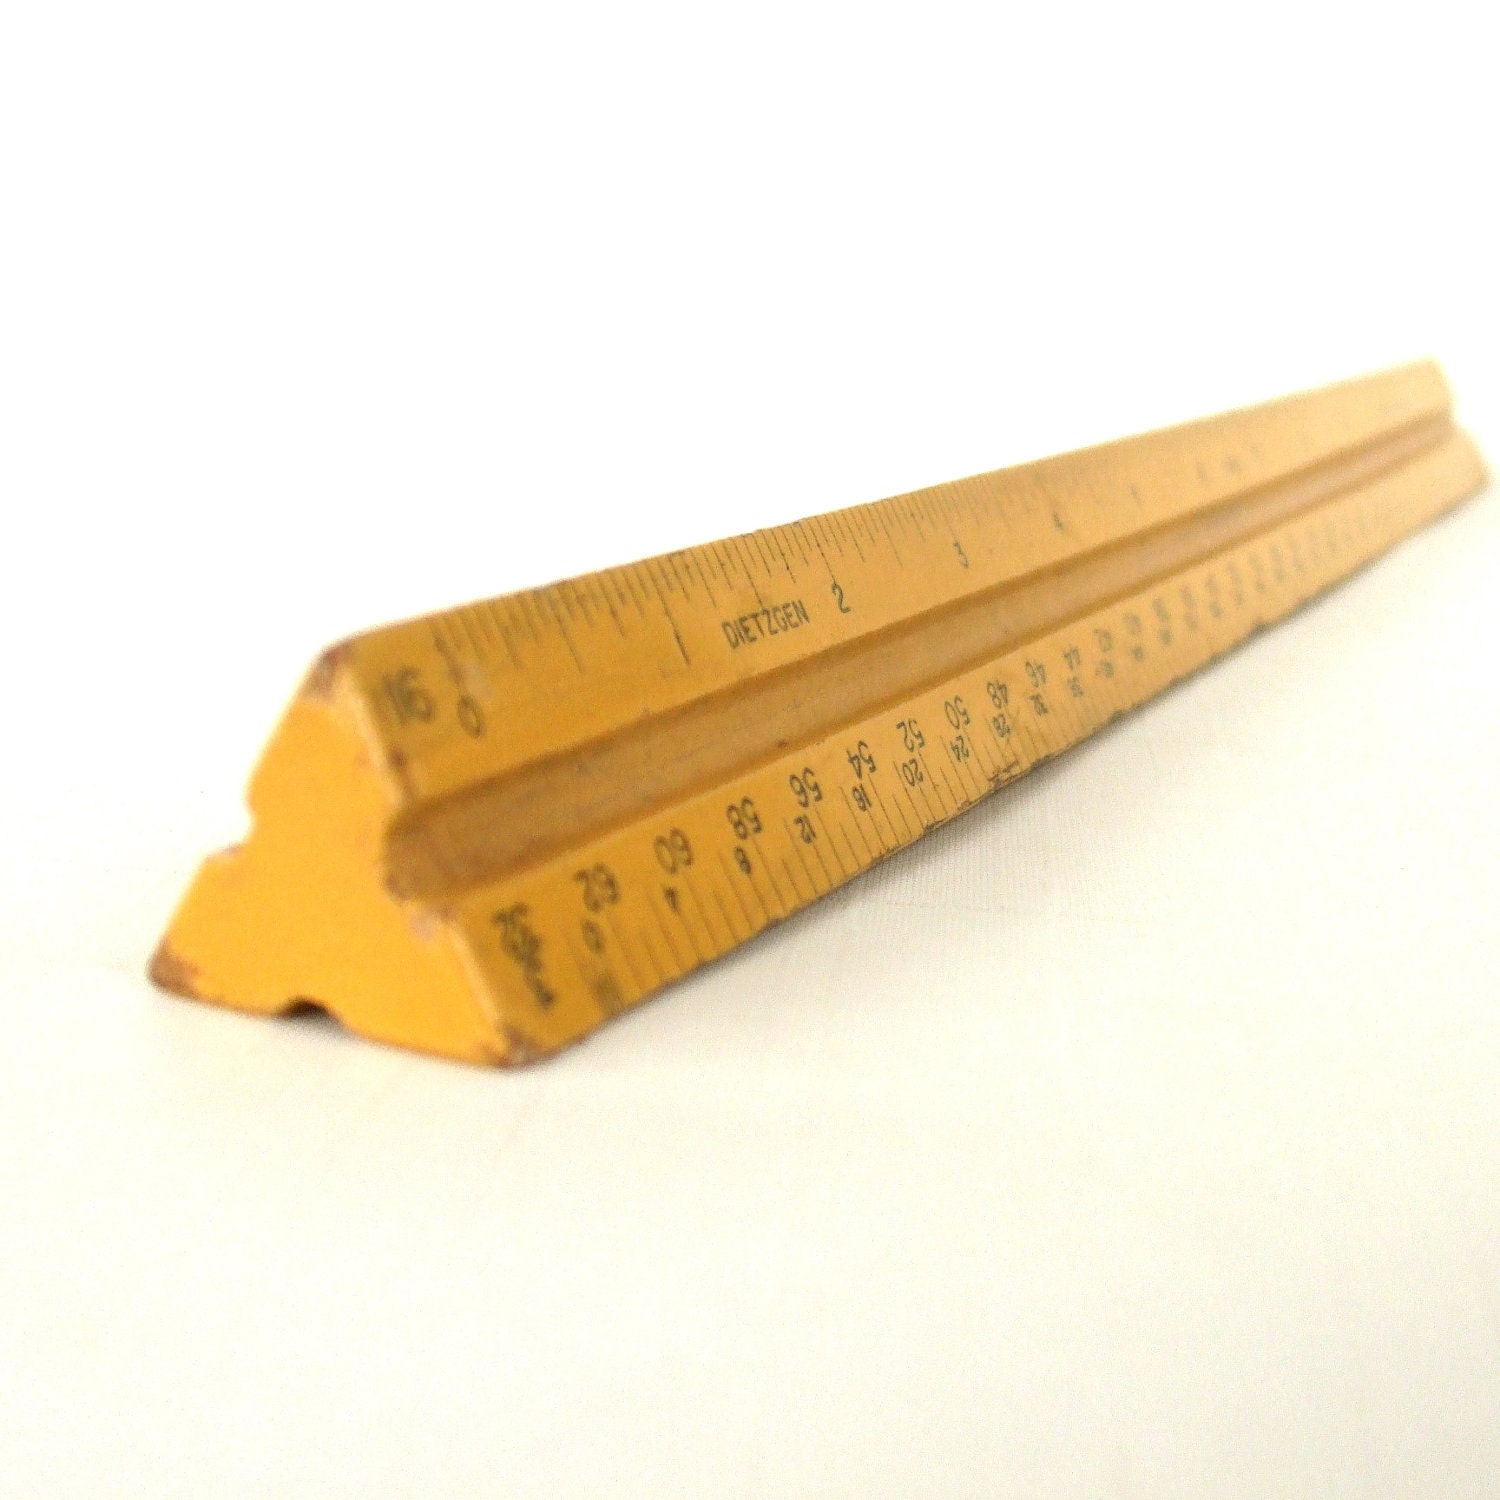 Vintage Scale Ruler for Engineering, Architects, Drafting - LaurasLastDitch